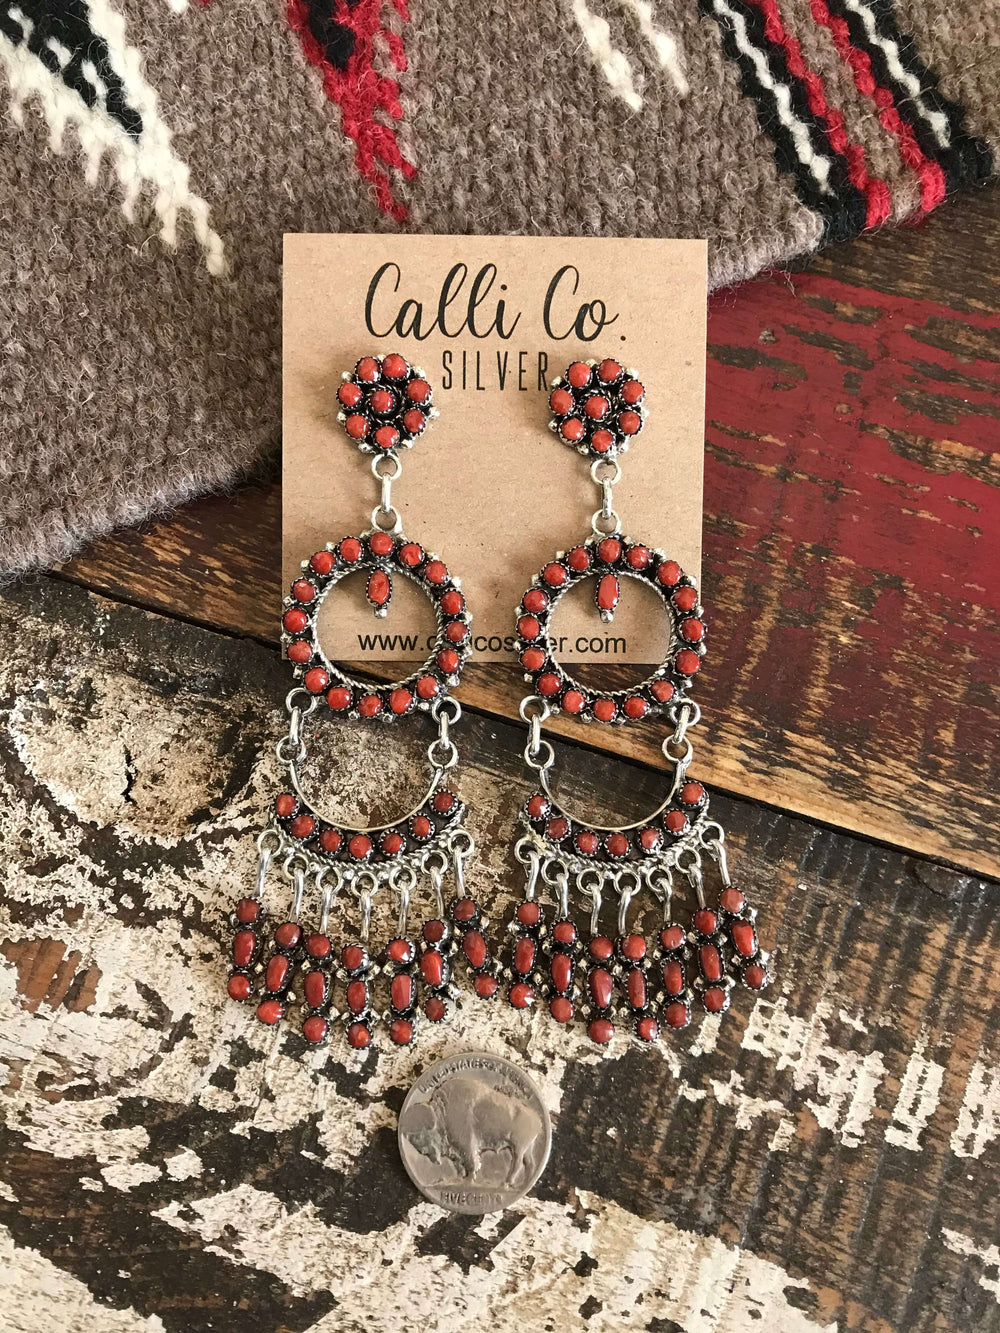 The Alta Earrings in Coral-Earrings-Calli Co., Turquoise and Silver Jewelry, Native American Handmade, Zuni Tribe, Navajo Tribe, Brock Texas